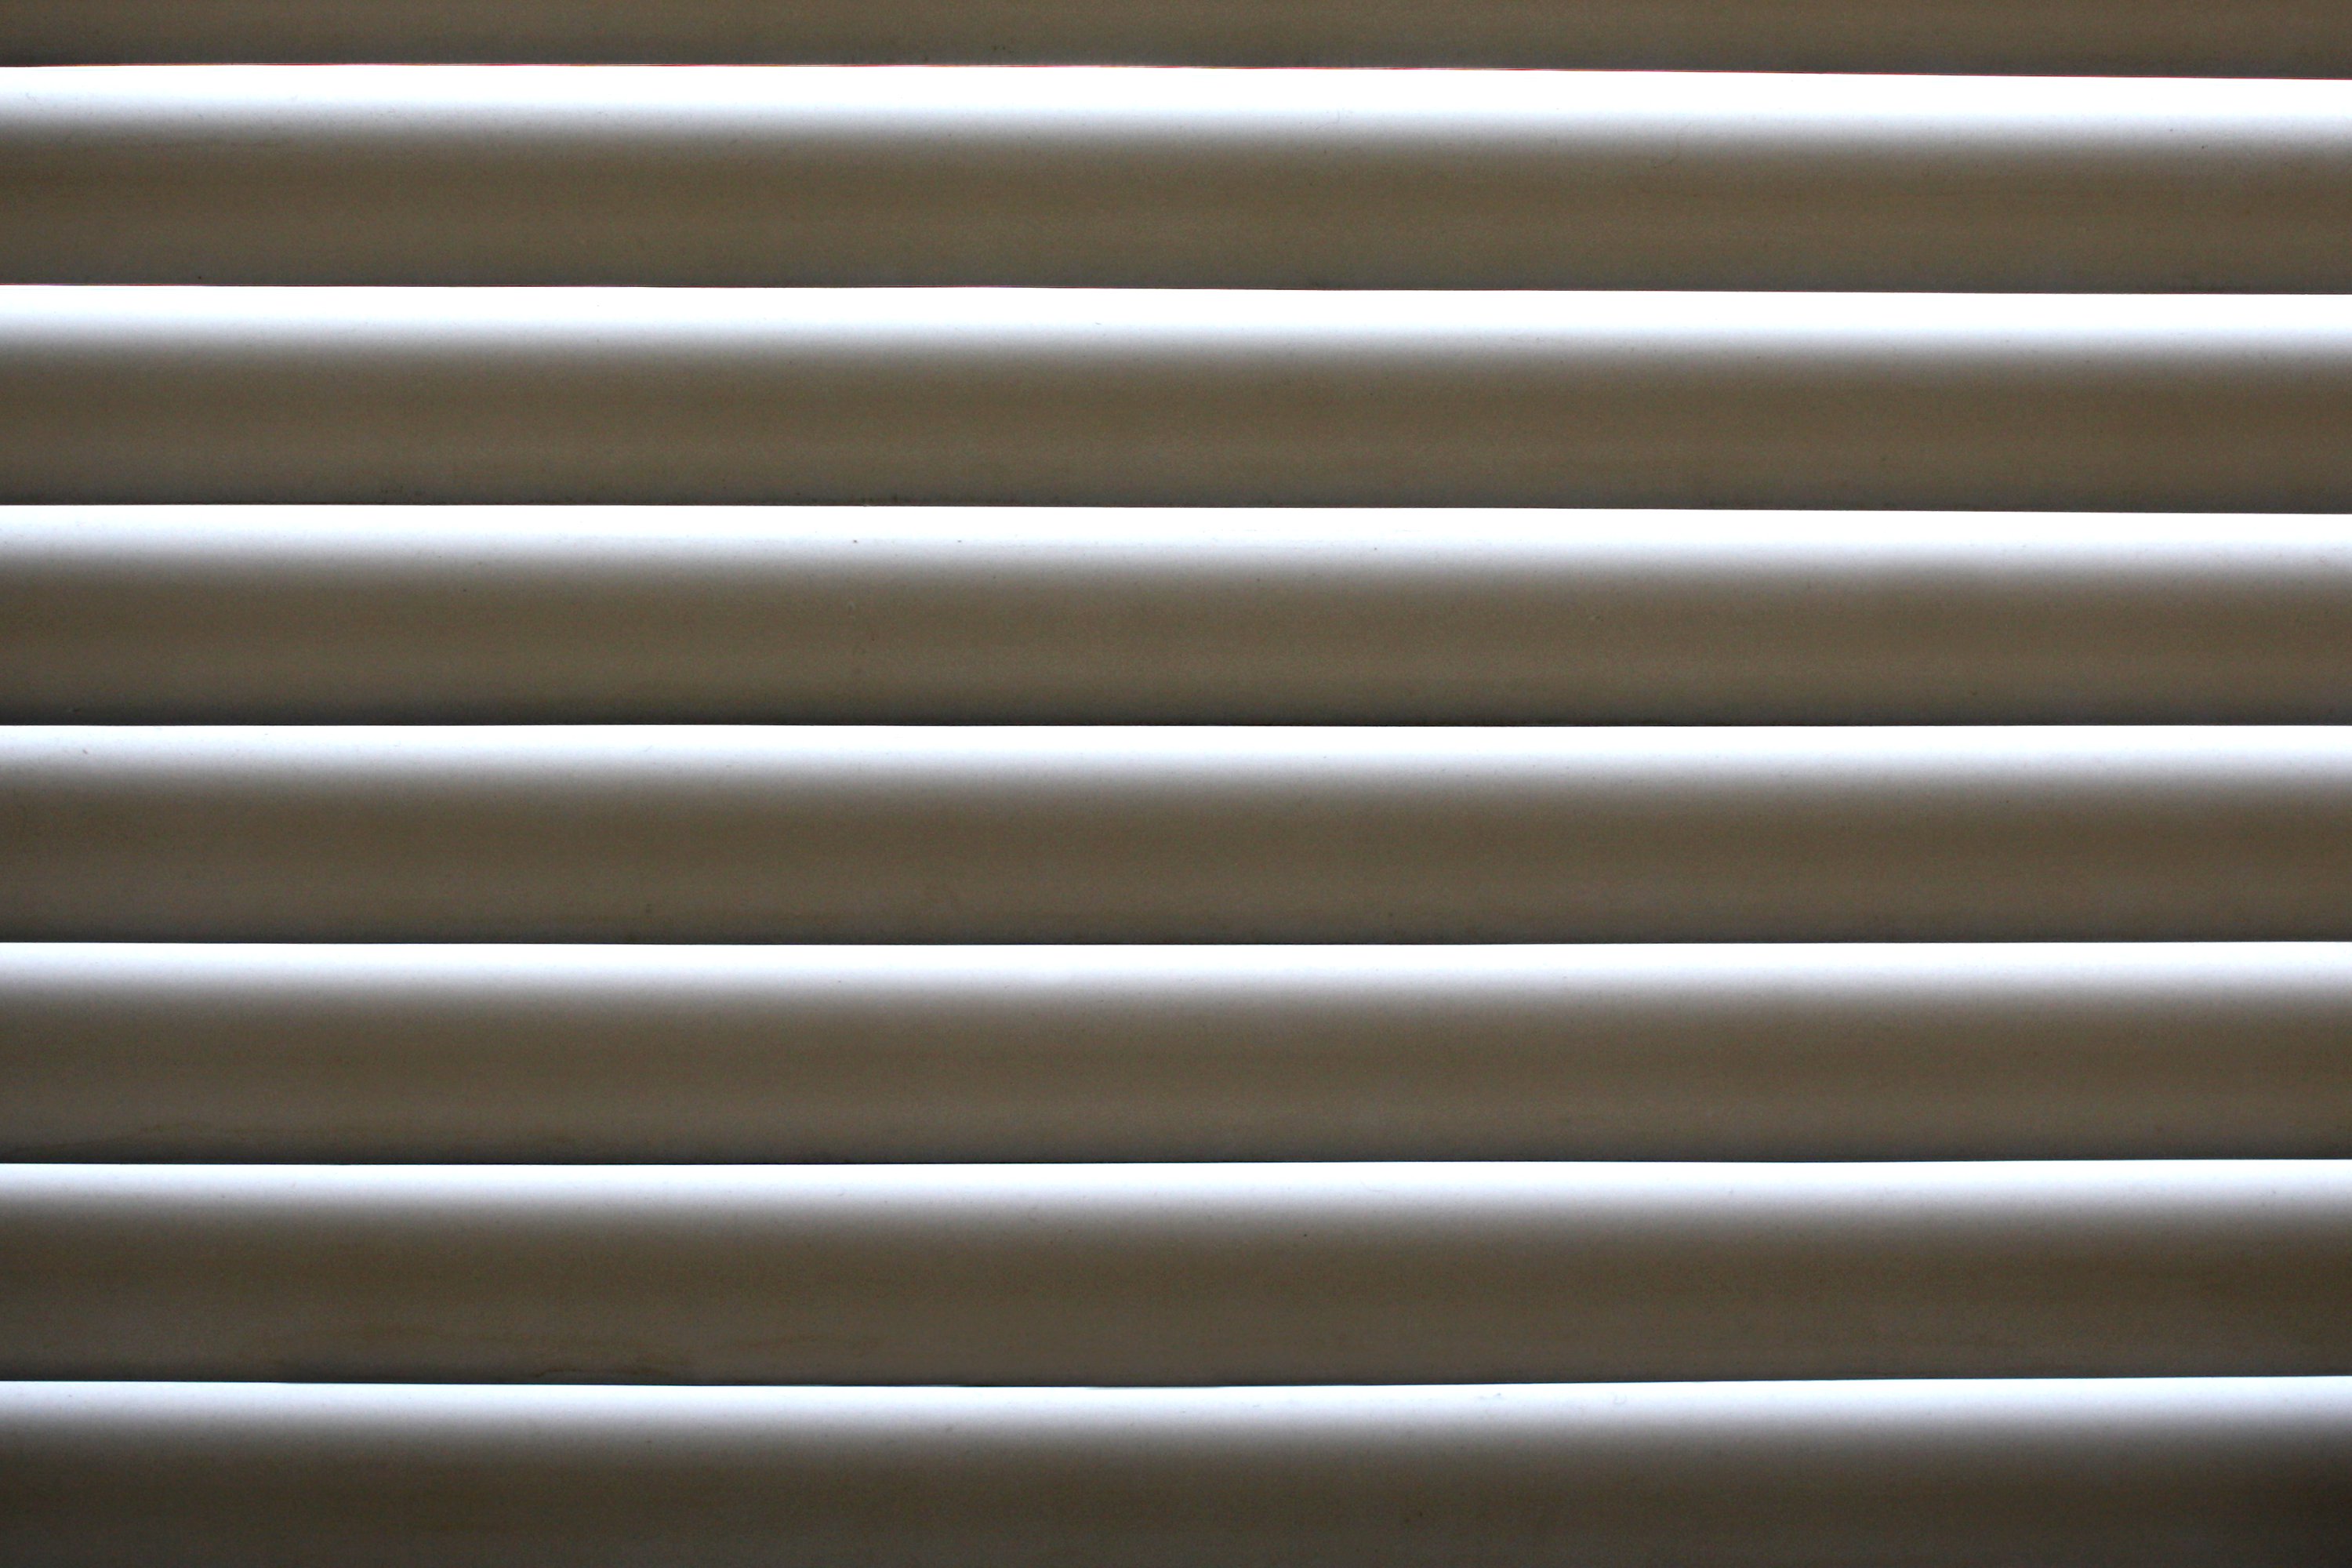 SHOPZILLA - 33 INCHES MINI BLINDS WINDOW BLINDS SHOPPING - HOME